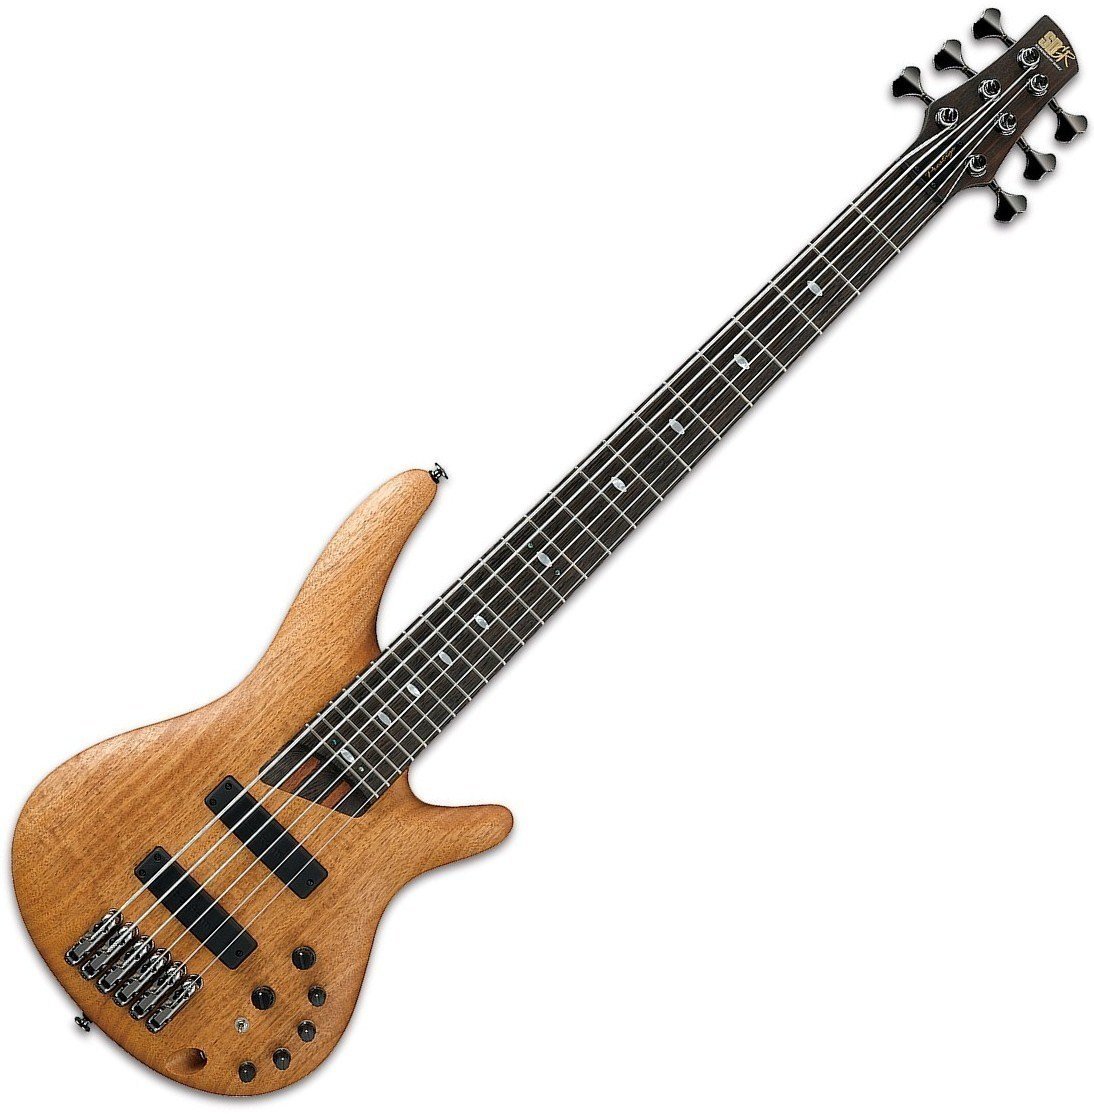 6-string Bassguitar Ibanez SR 4006E Stained Oil